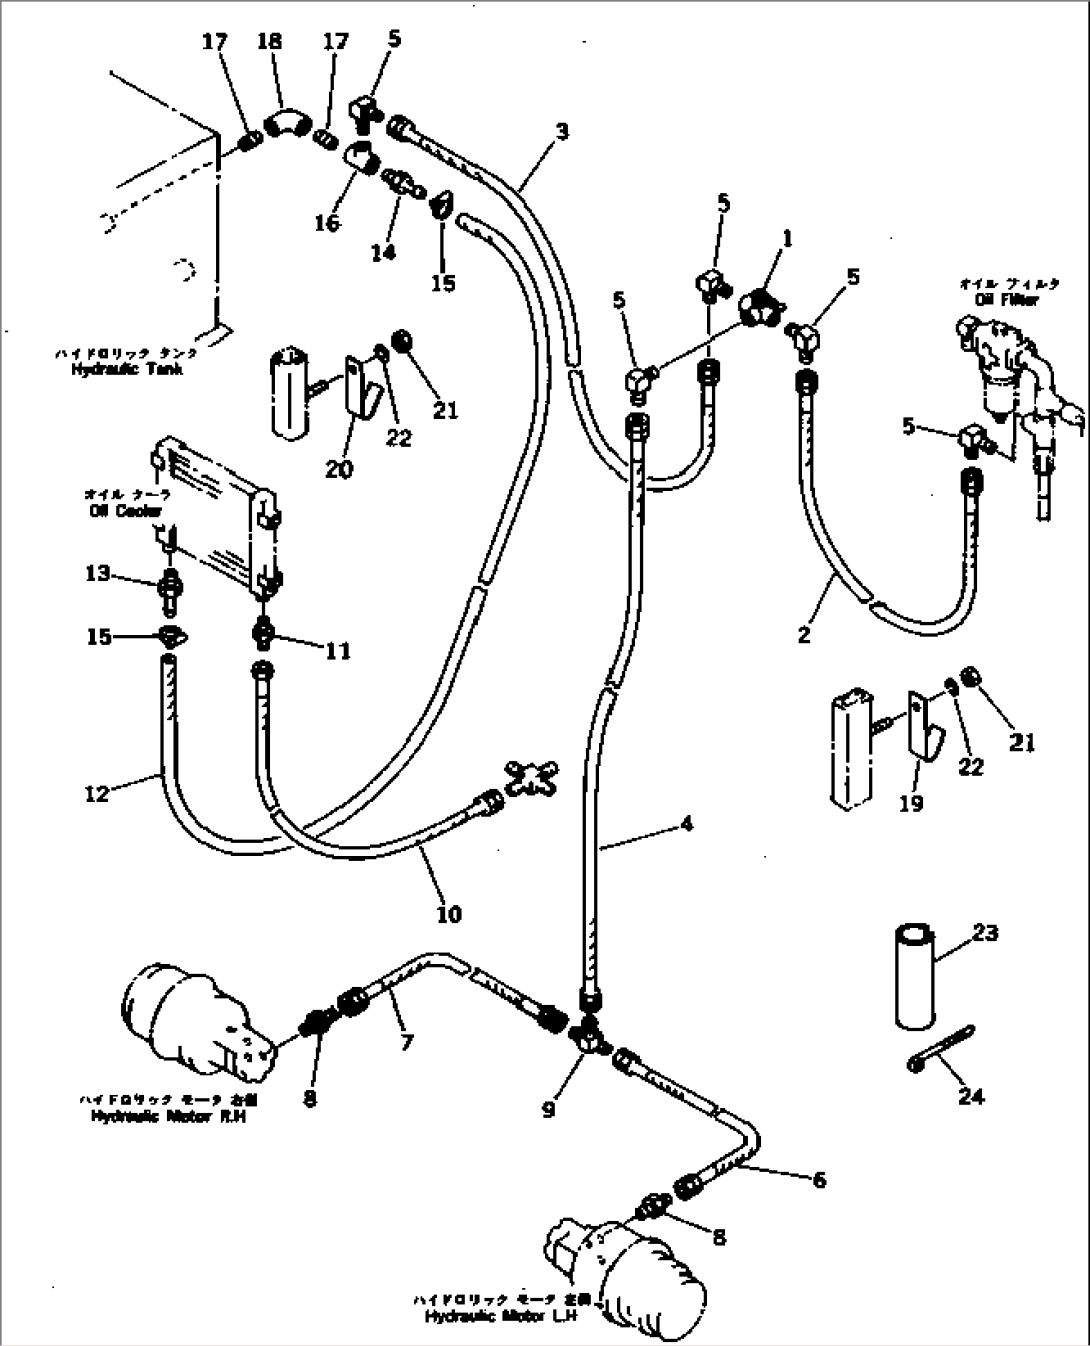 HYDRAULIC PIPING (FOR TRAVEL) (3/3) (MOTOR TO TANK)